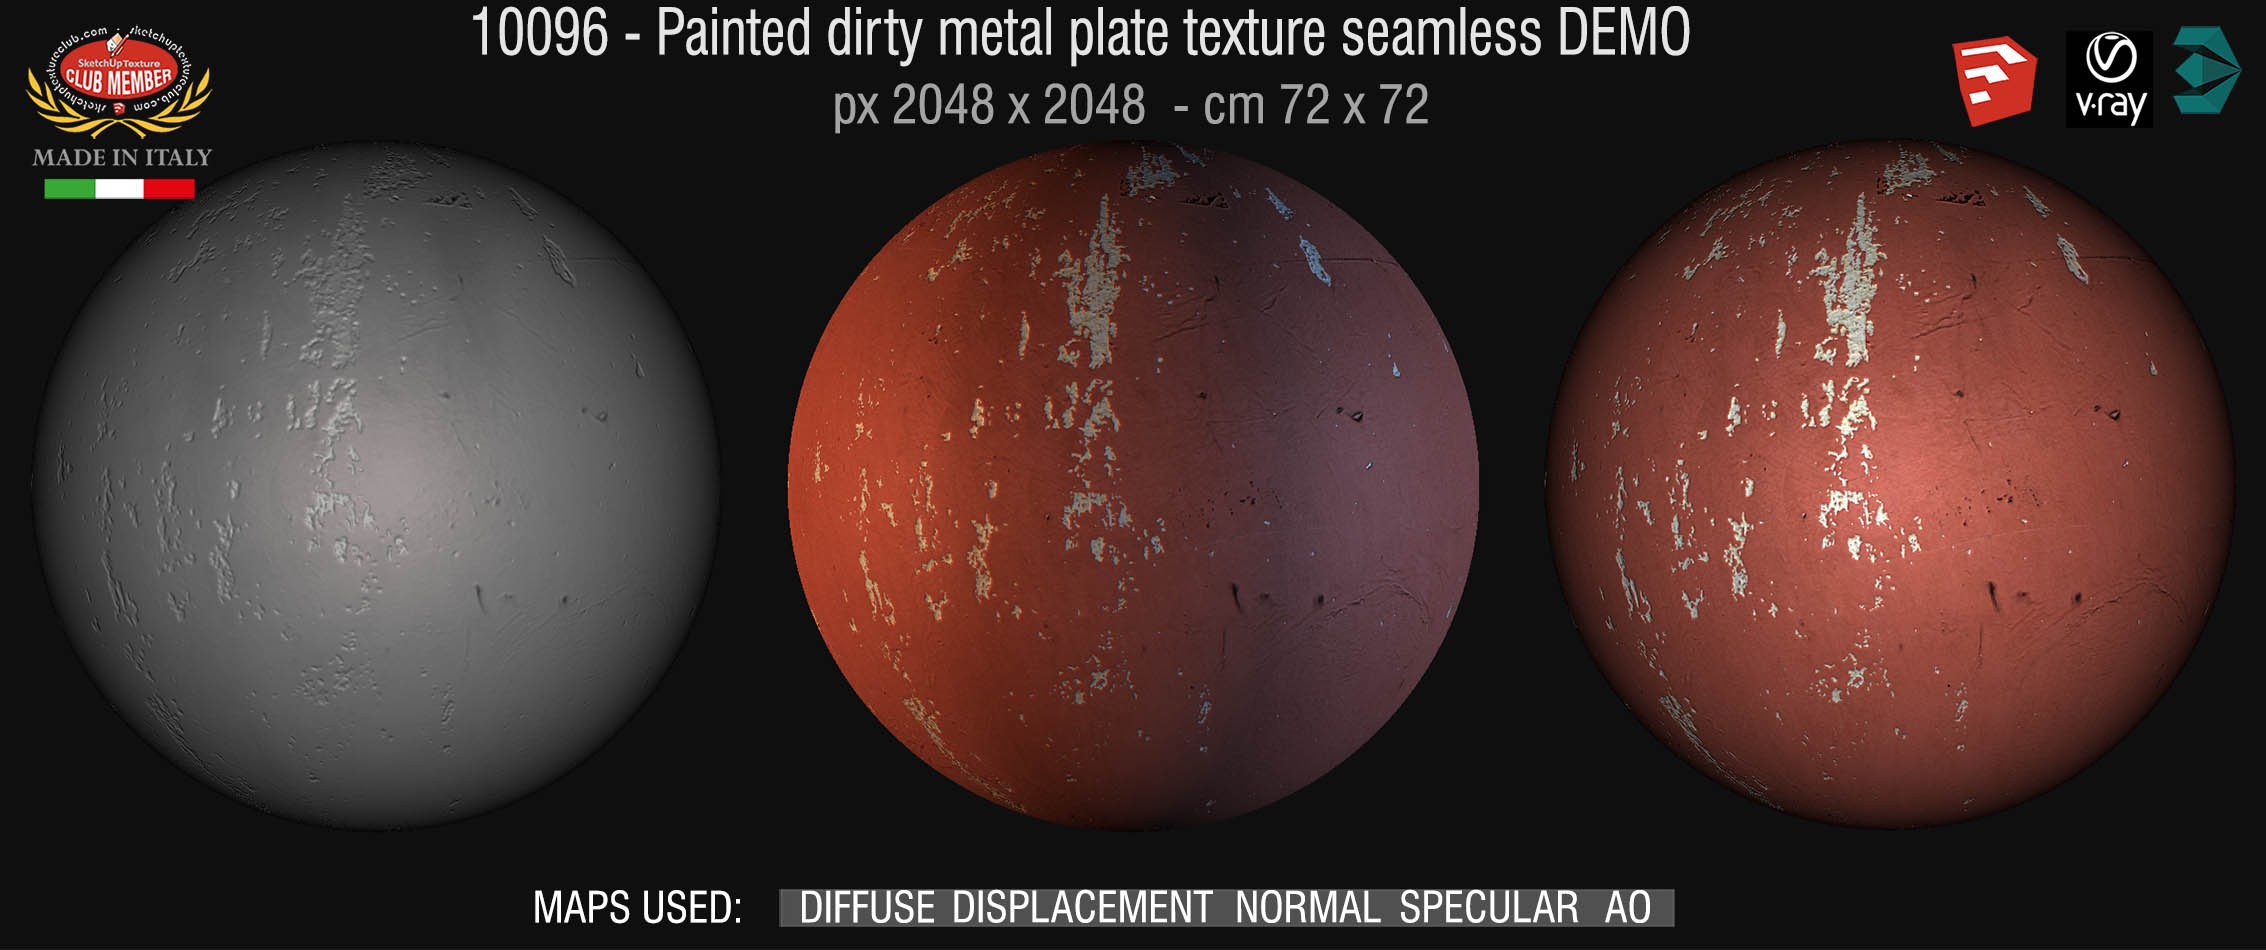 10096 HR Painted dirty metal texture seamless + maps DEMO